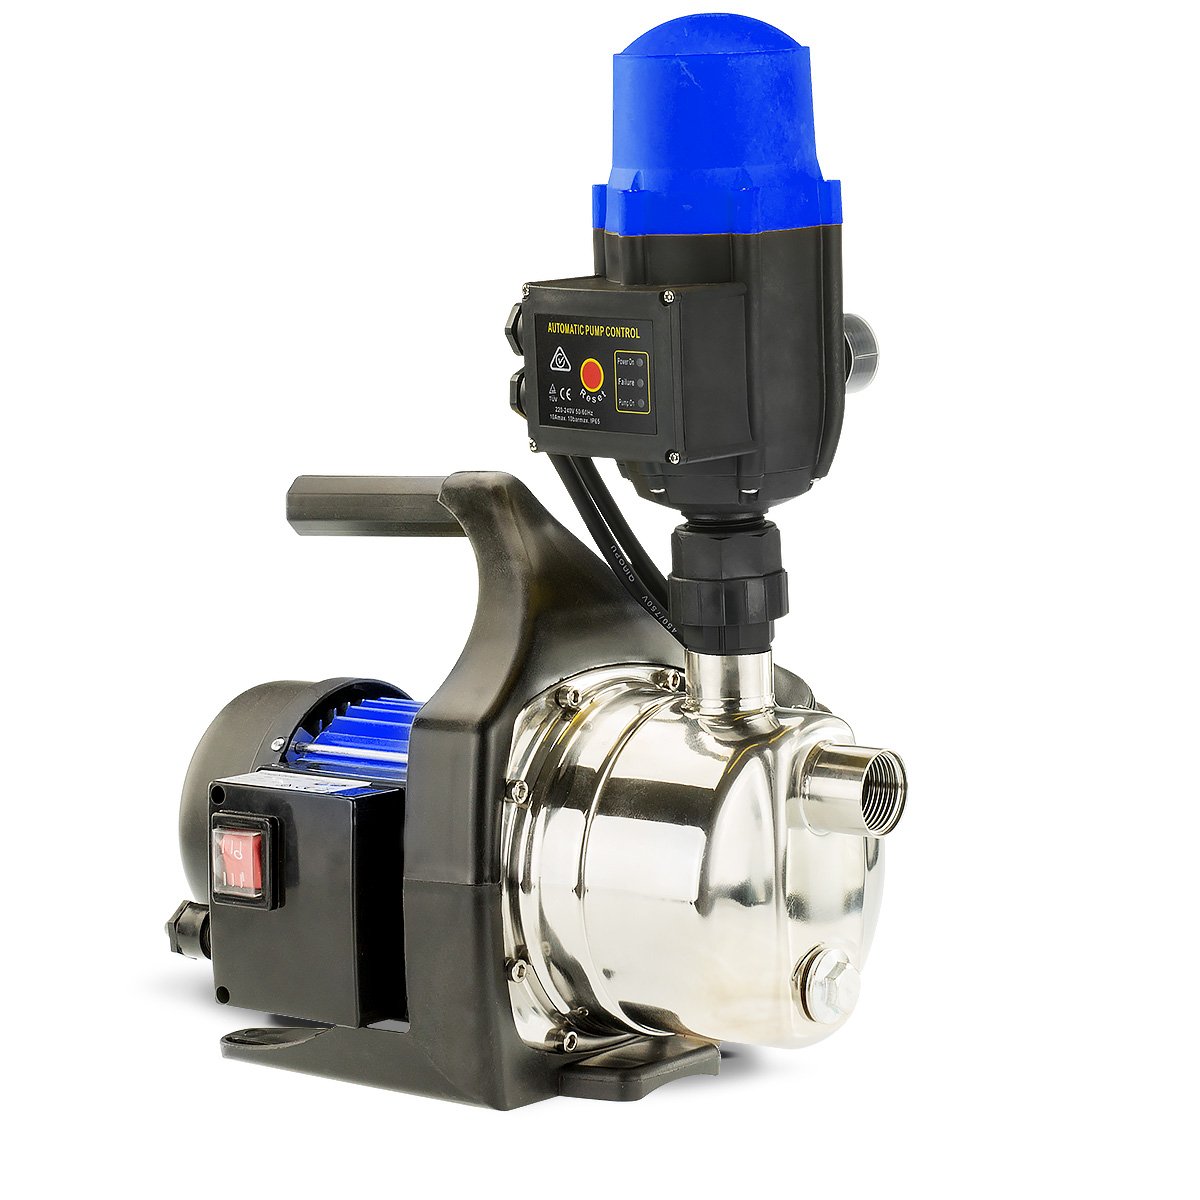 1400w Automatic stainless electric water pump - Blue 2